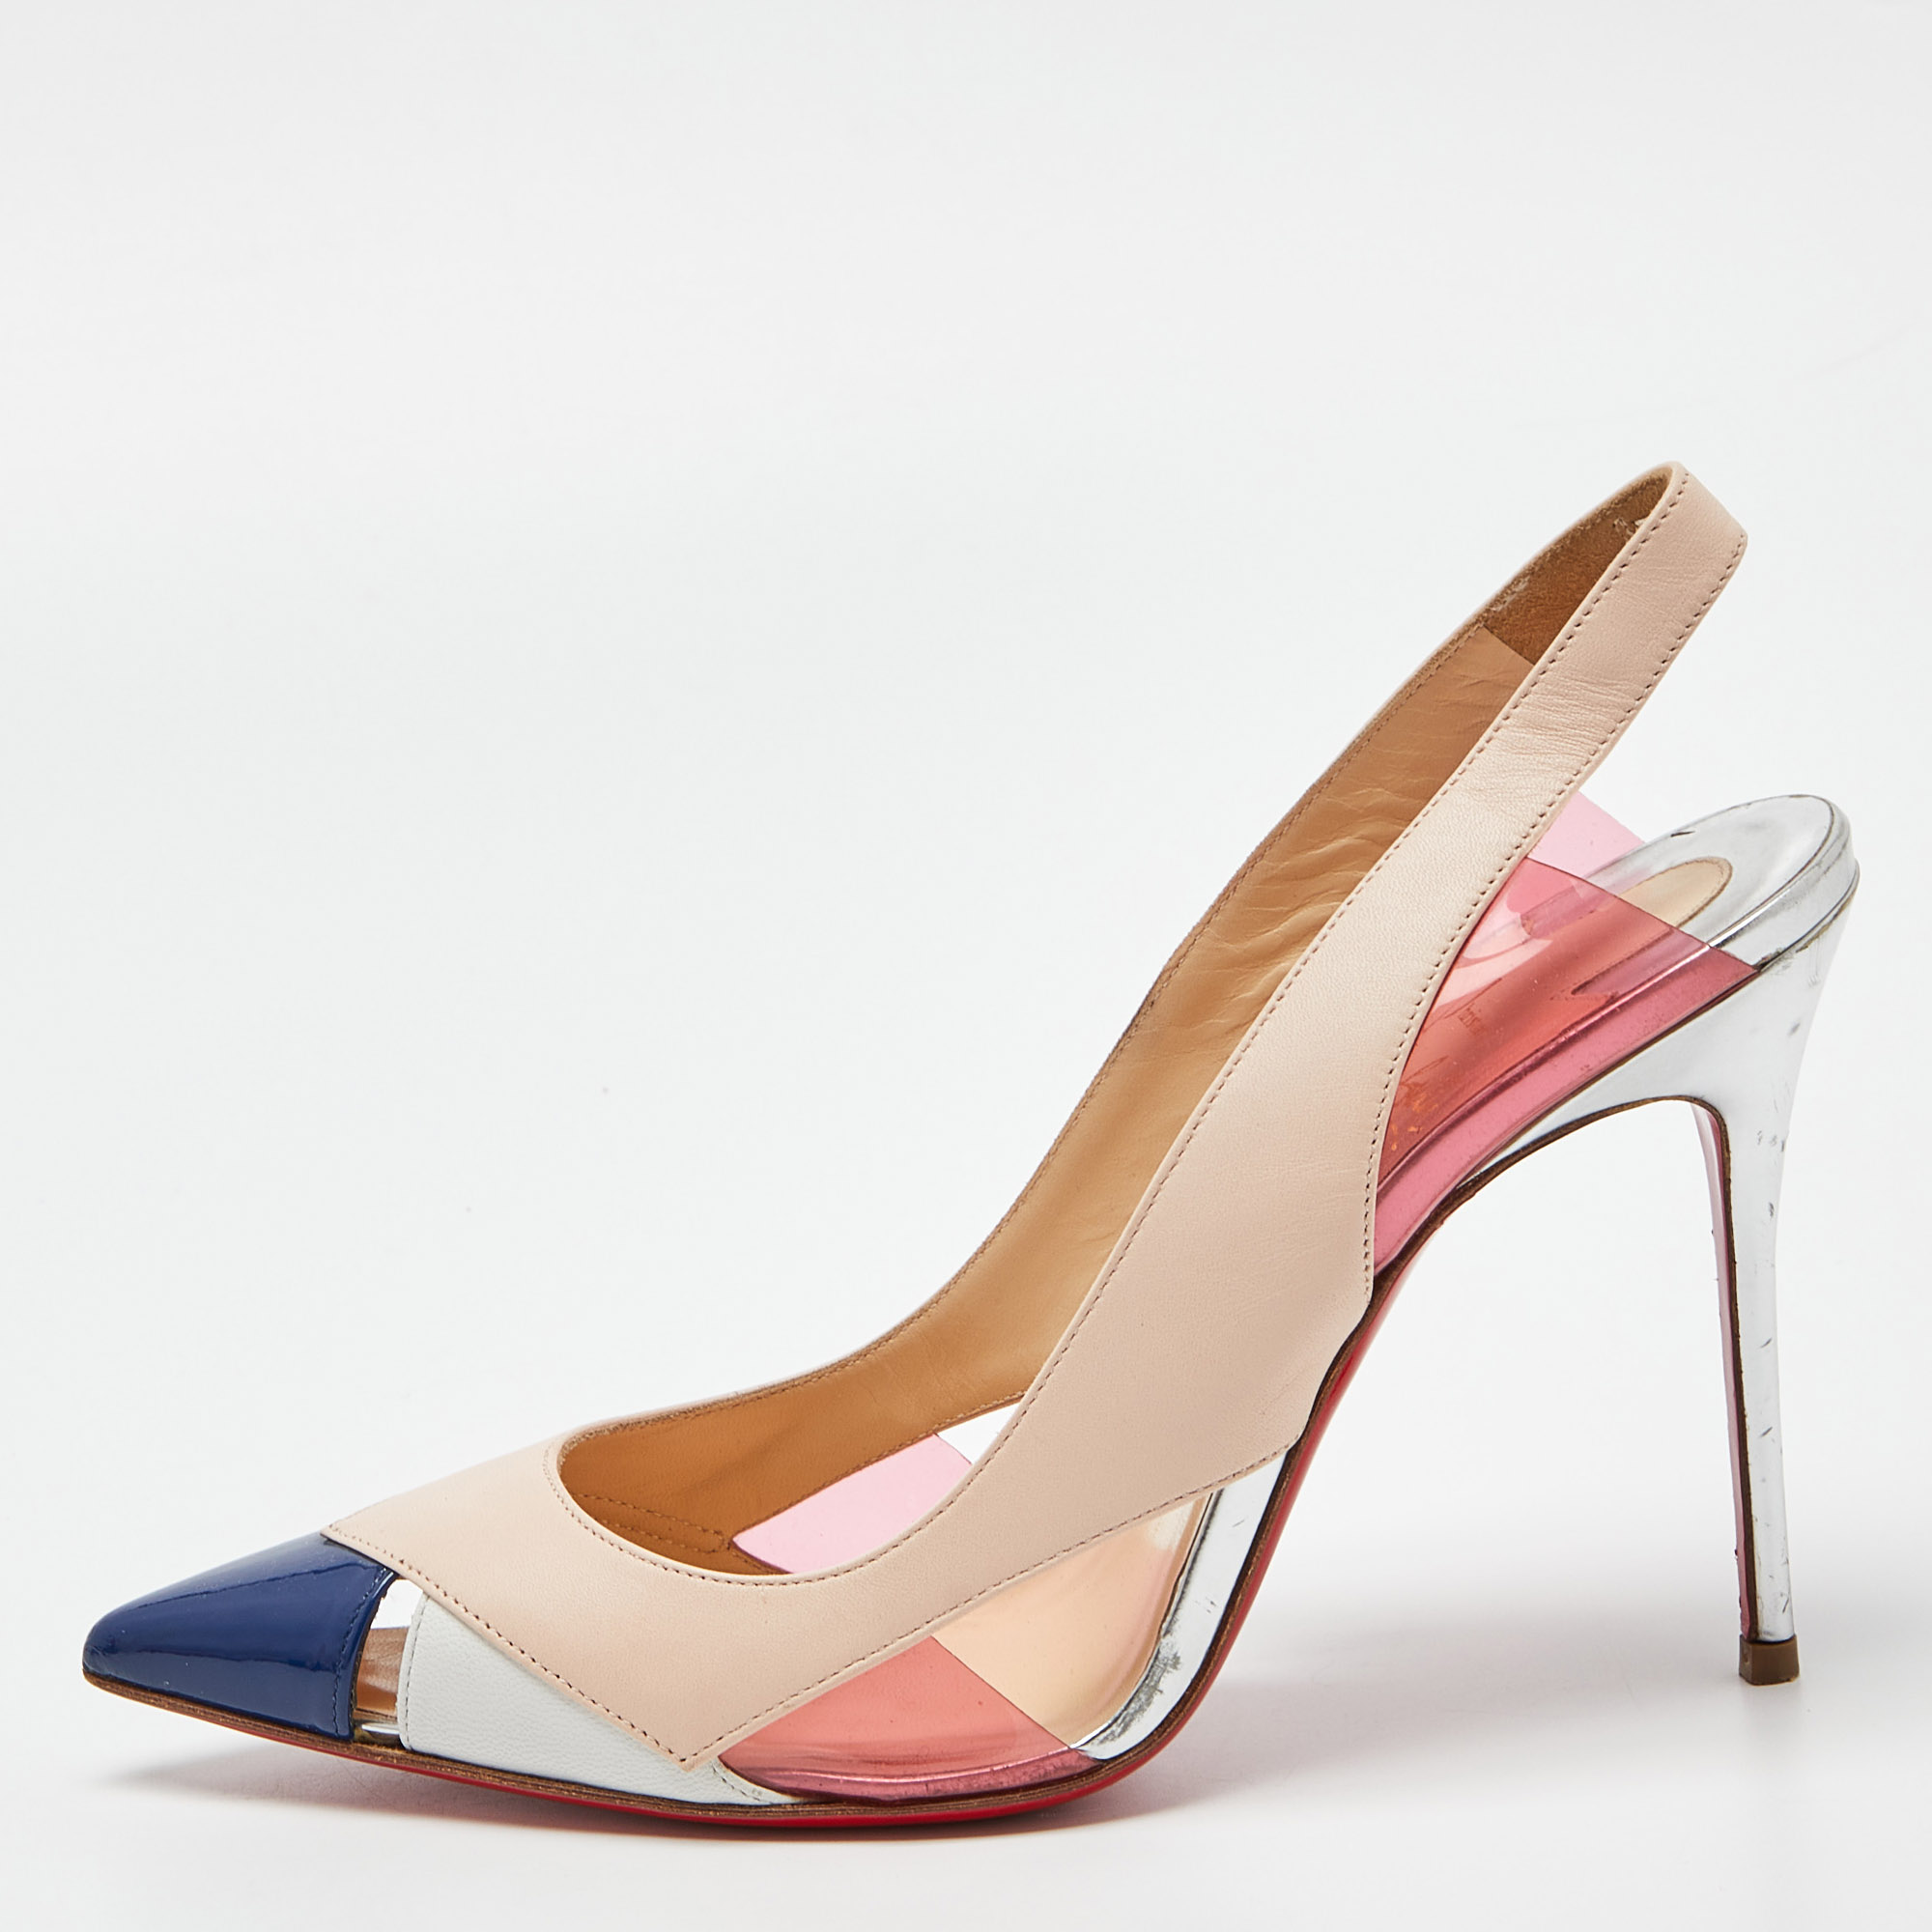 Christian louboutin tricolor leather and pvc air chance slingback sandals size 37